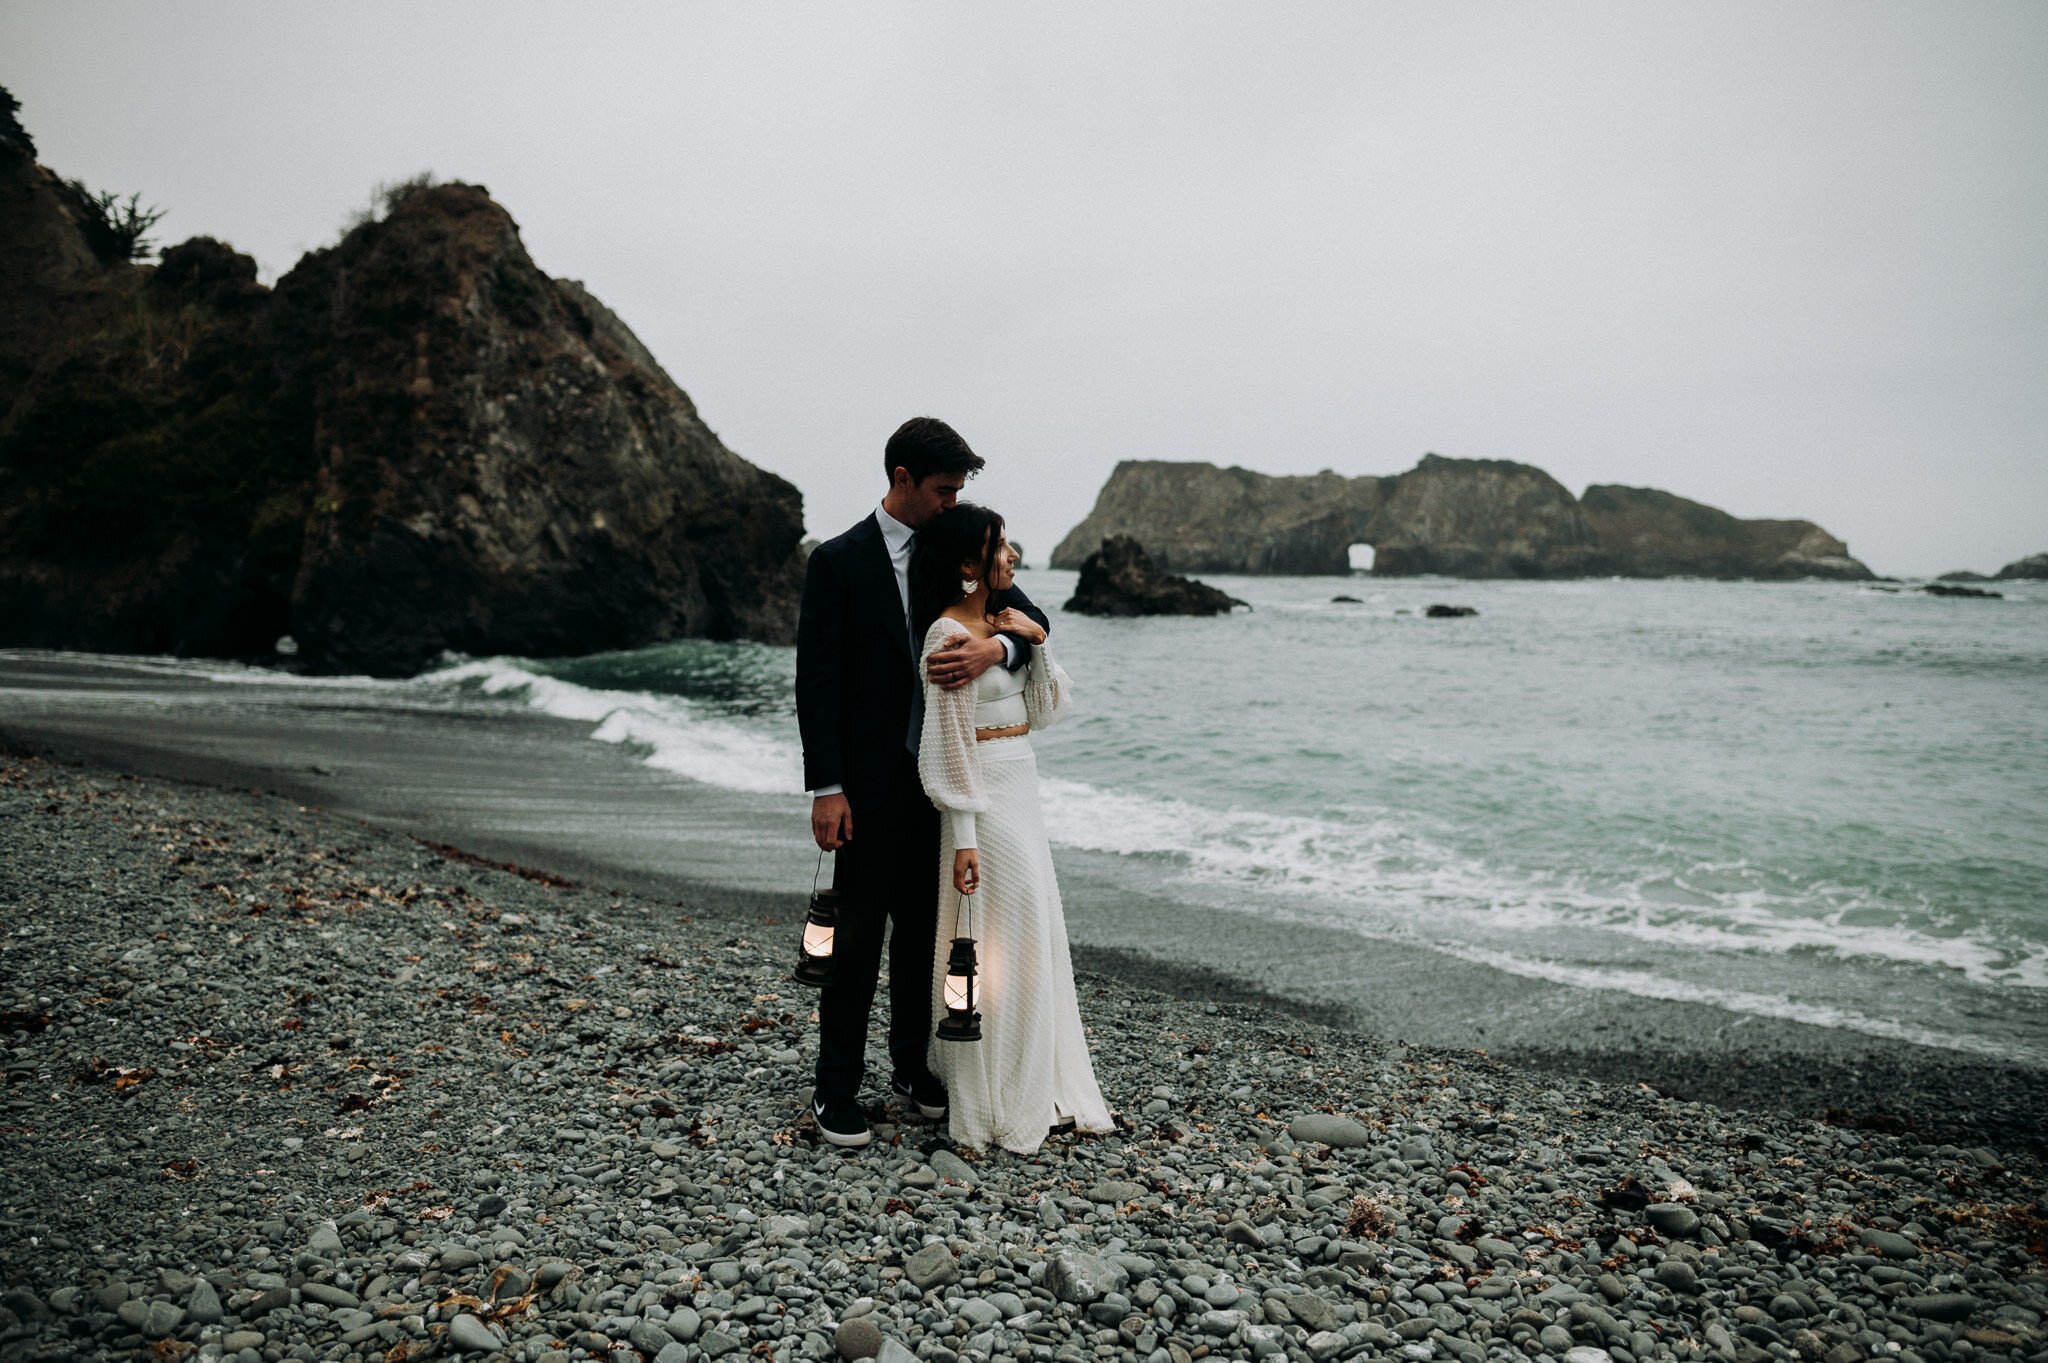 newly married couple in wedding attire embracing with groom standing behind bride both are hold lanterns on the beach in Mendocino.